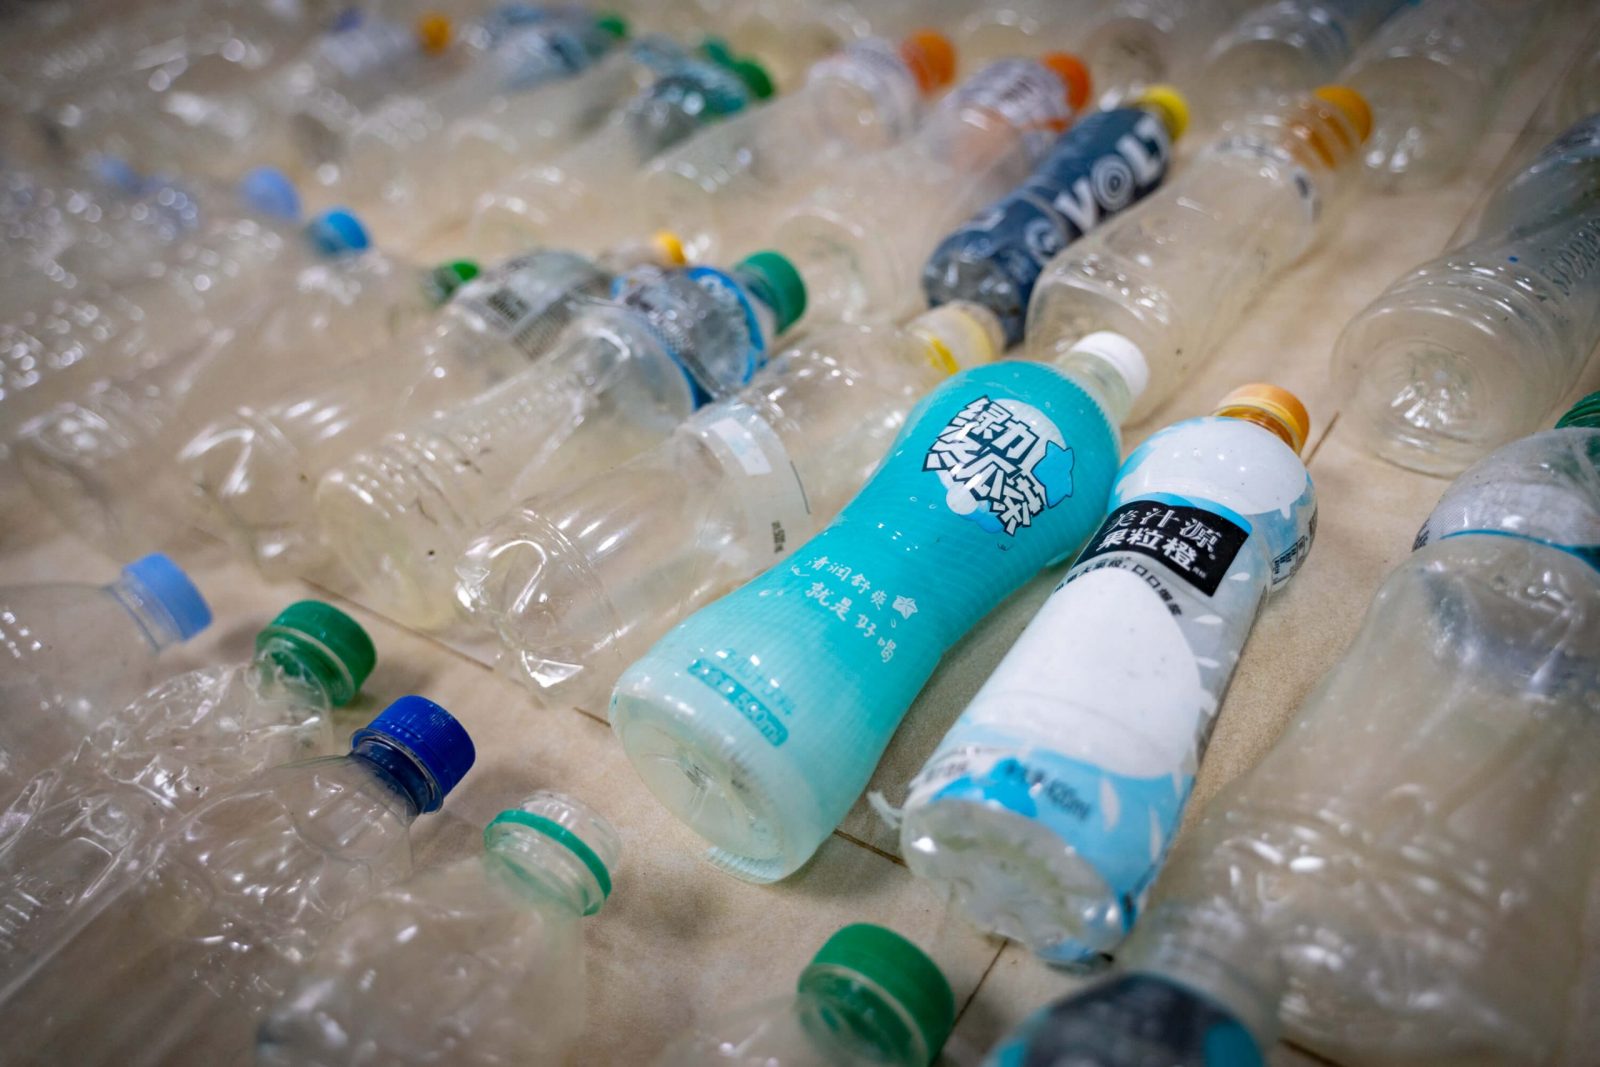 A blue water bottle with a Chinese label lays amongst a bunch of other plastic bottles